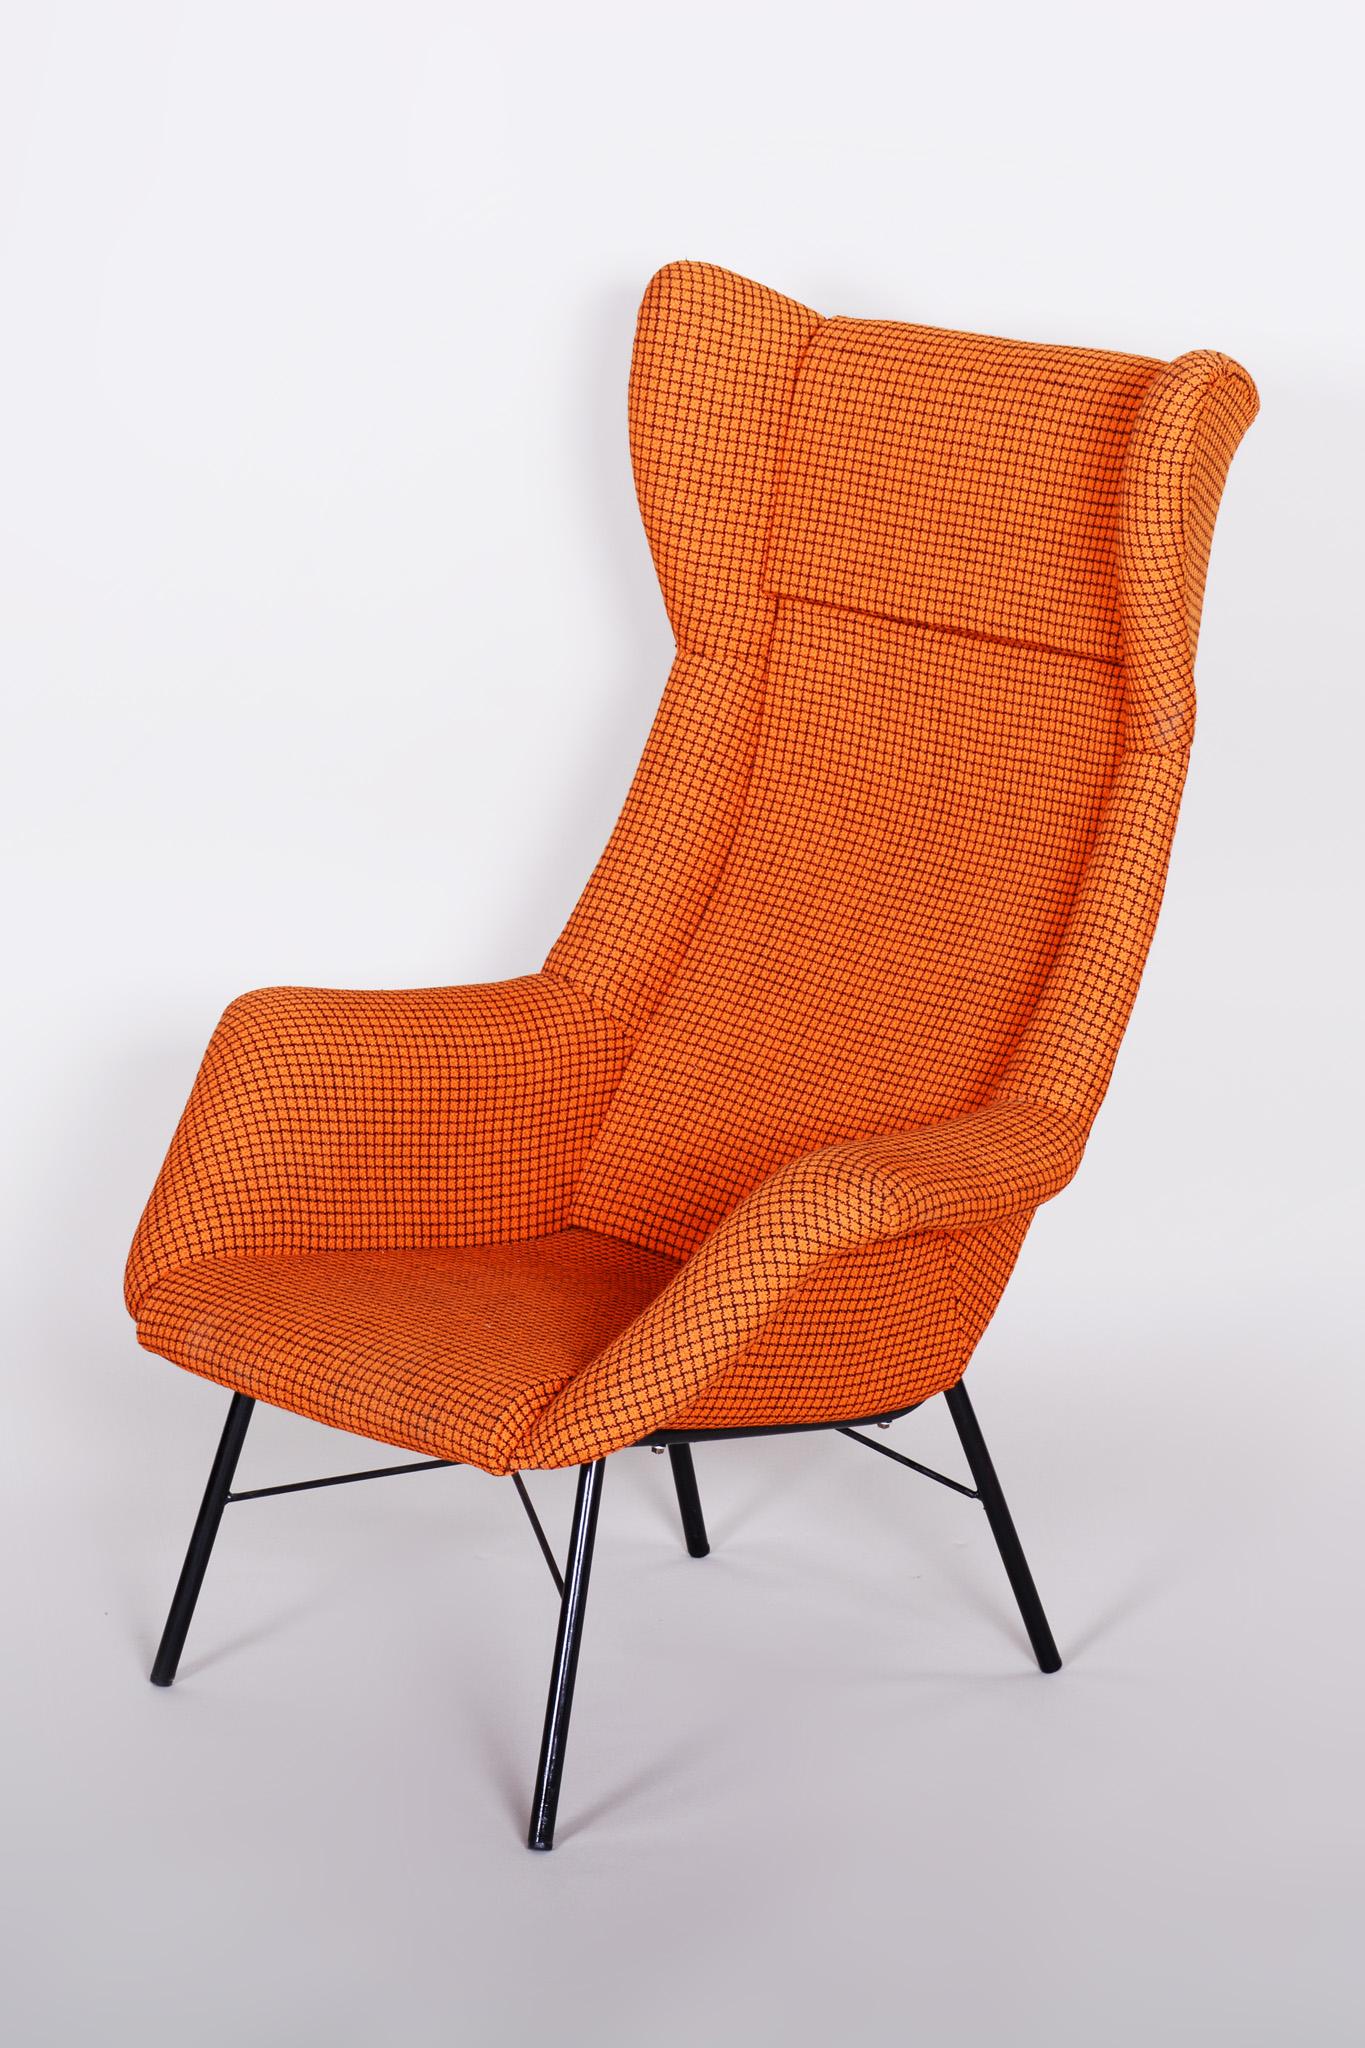 Orange Czech Midcentury Armchairs, 1960s, Original Fabric, Designed by Navrátil In Good Condition For Sale In Horomerice, CZ